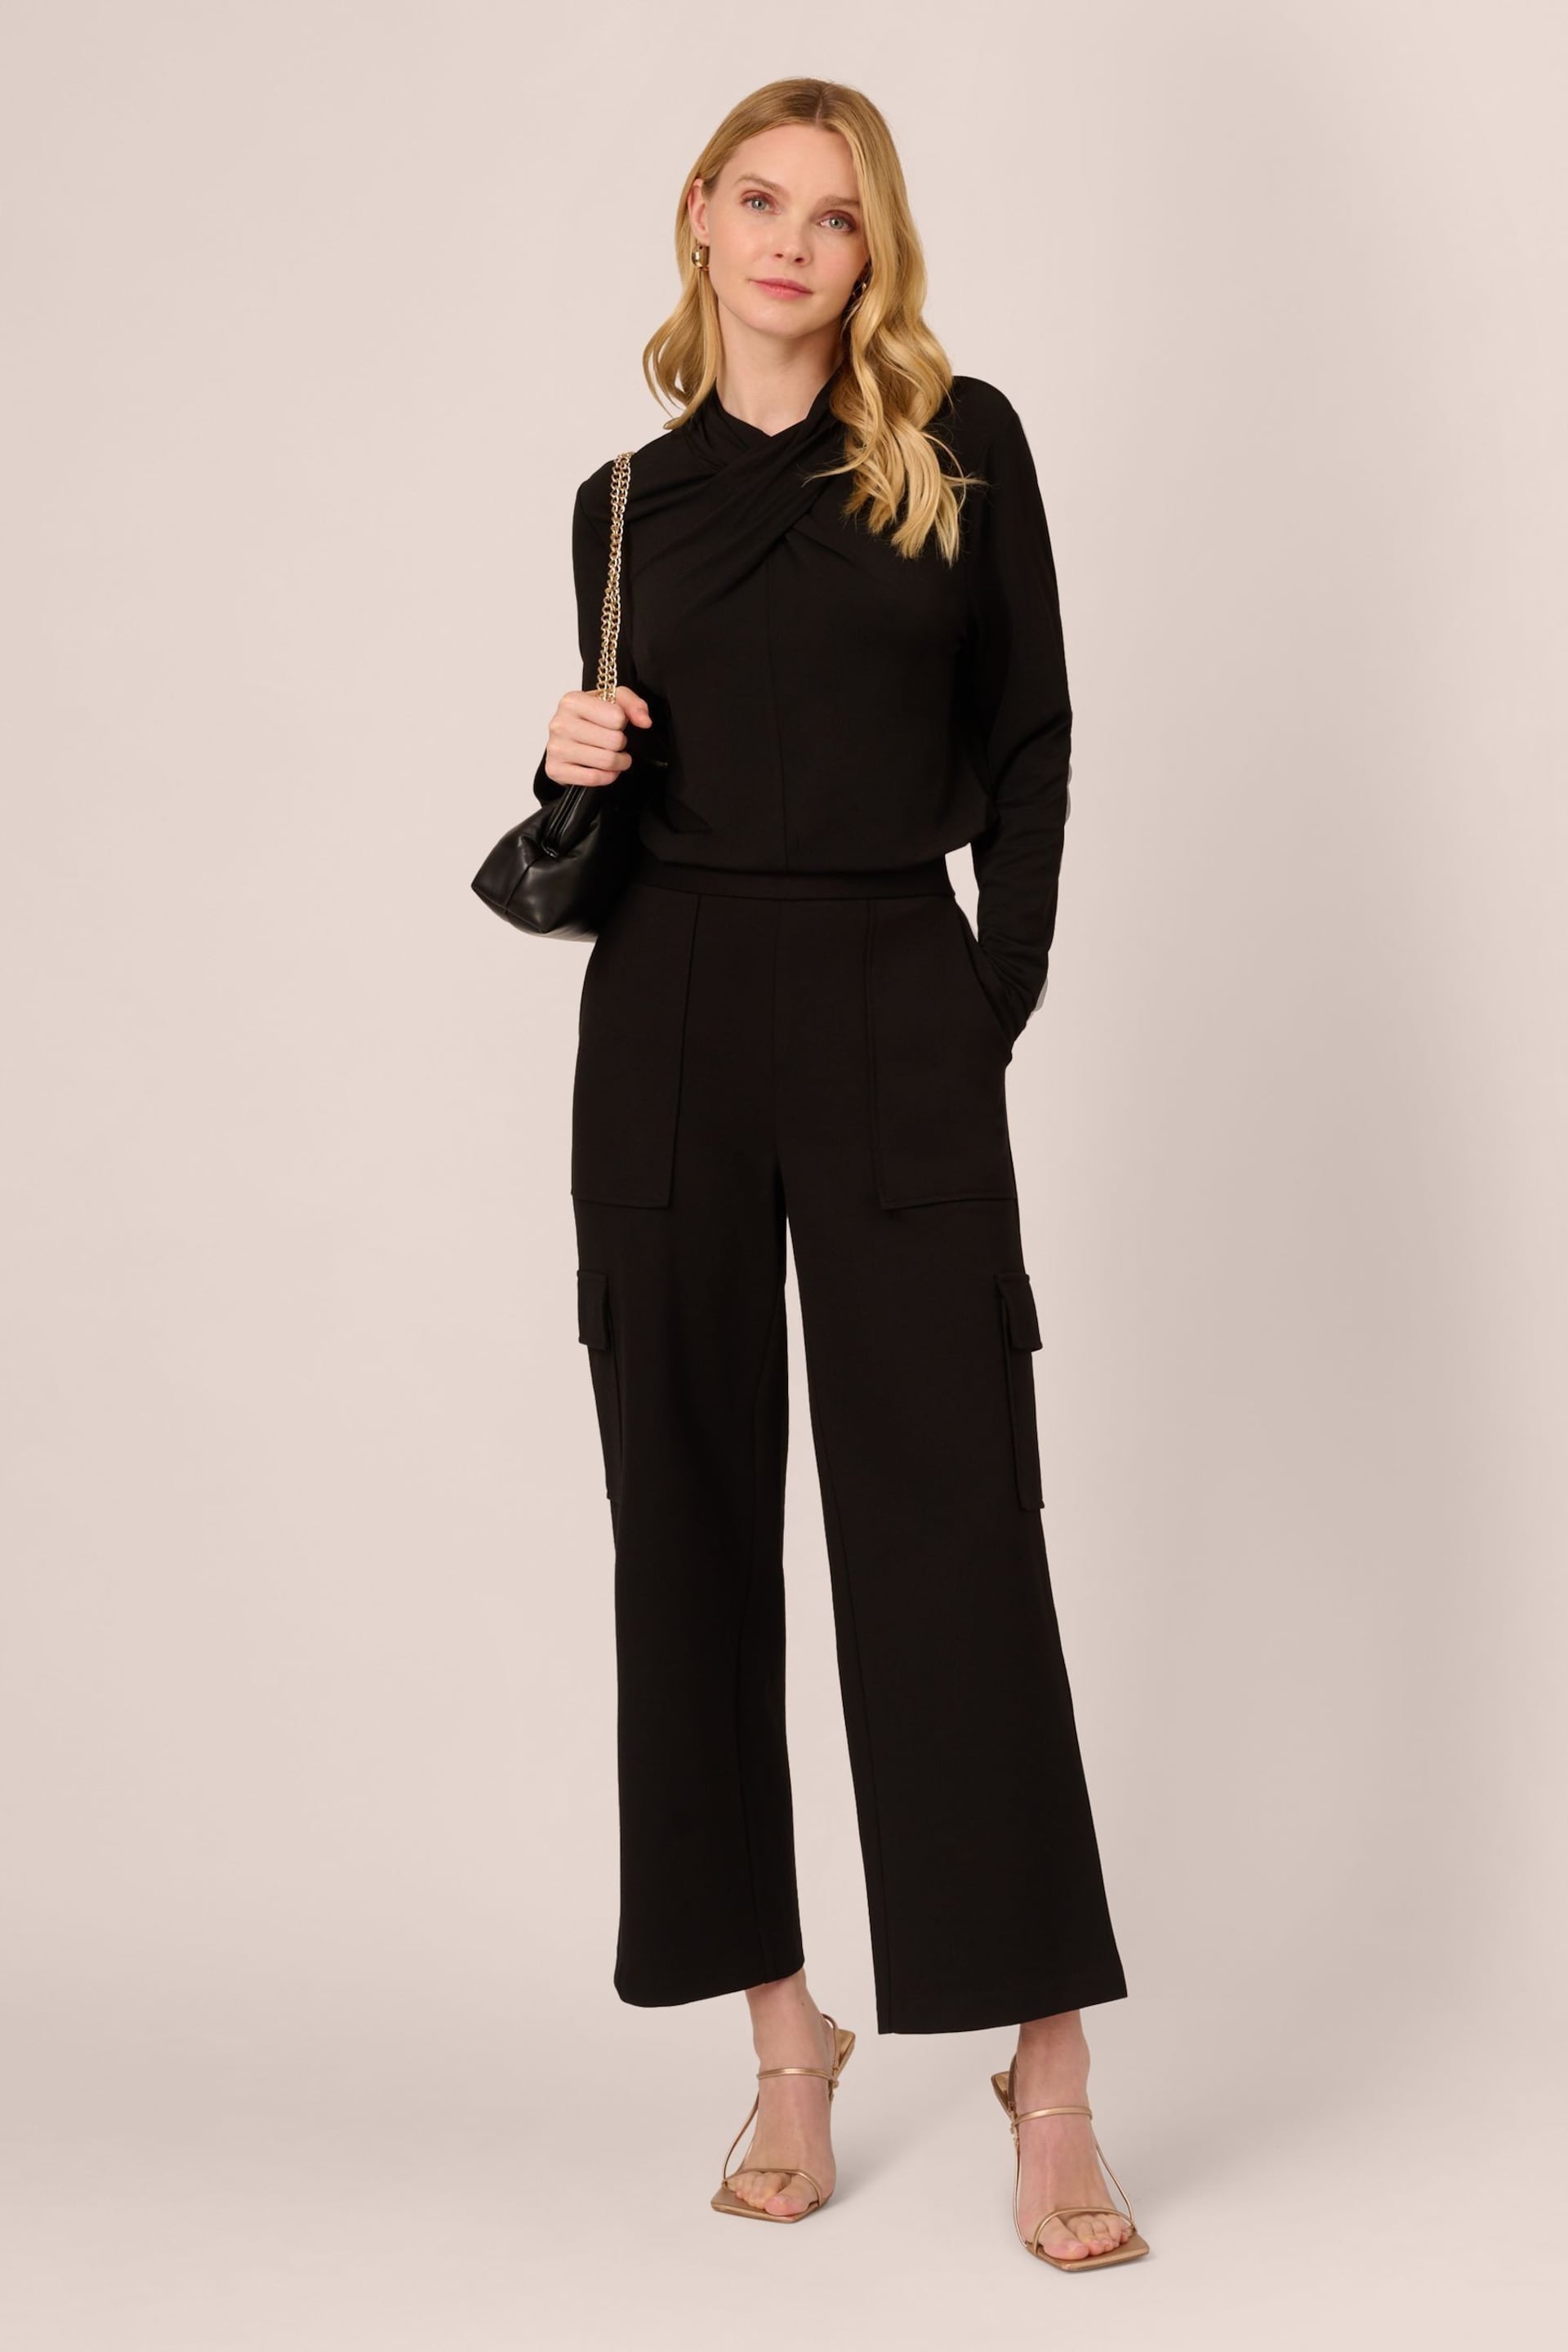 Adrianna Papell Ponte Knit Cargo Pull On Black Trouses - Image 3 of 6